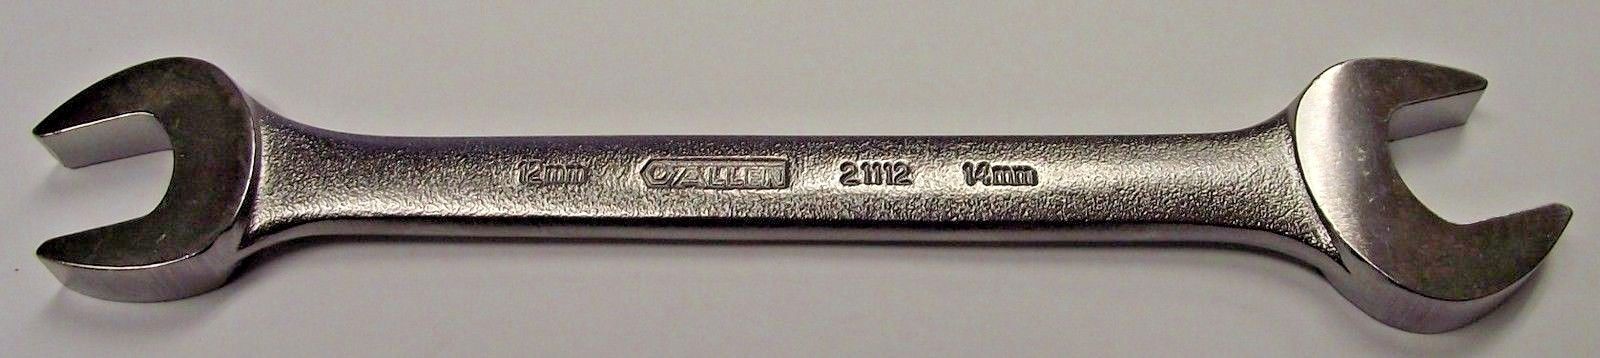 Allen 21112 12mm to 14mm Open End Wrench USA